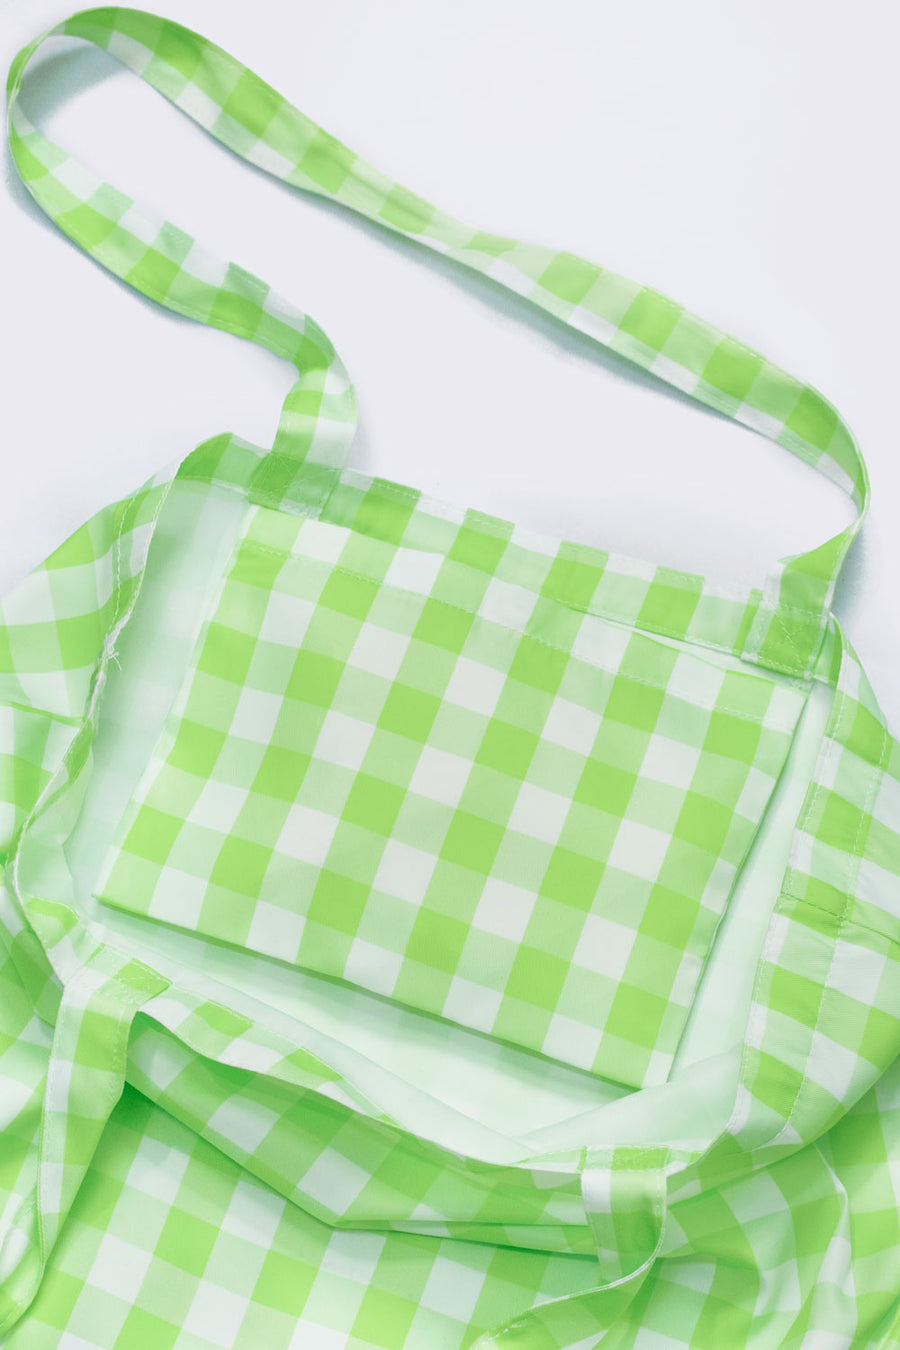 For the Gingham Geeks